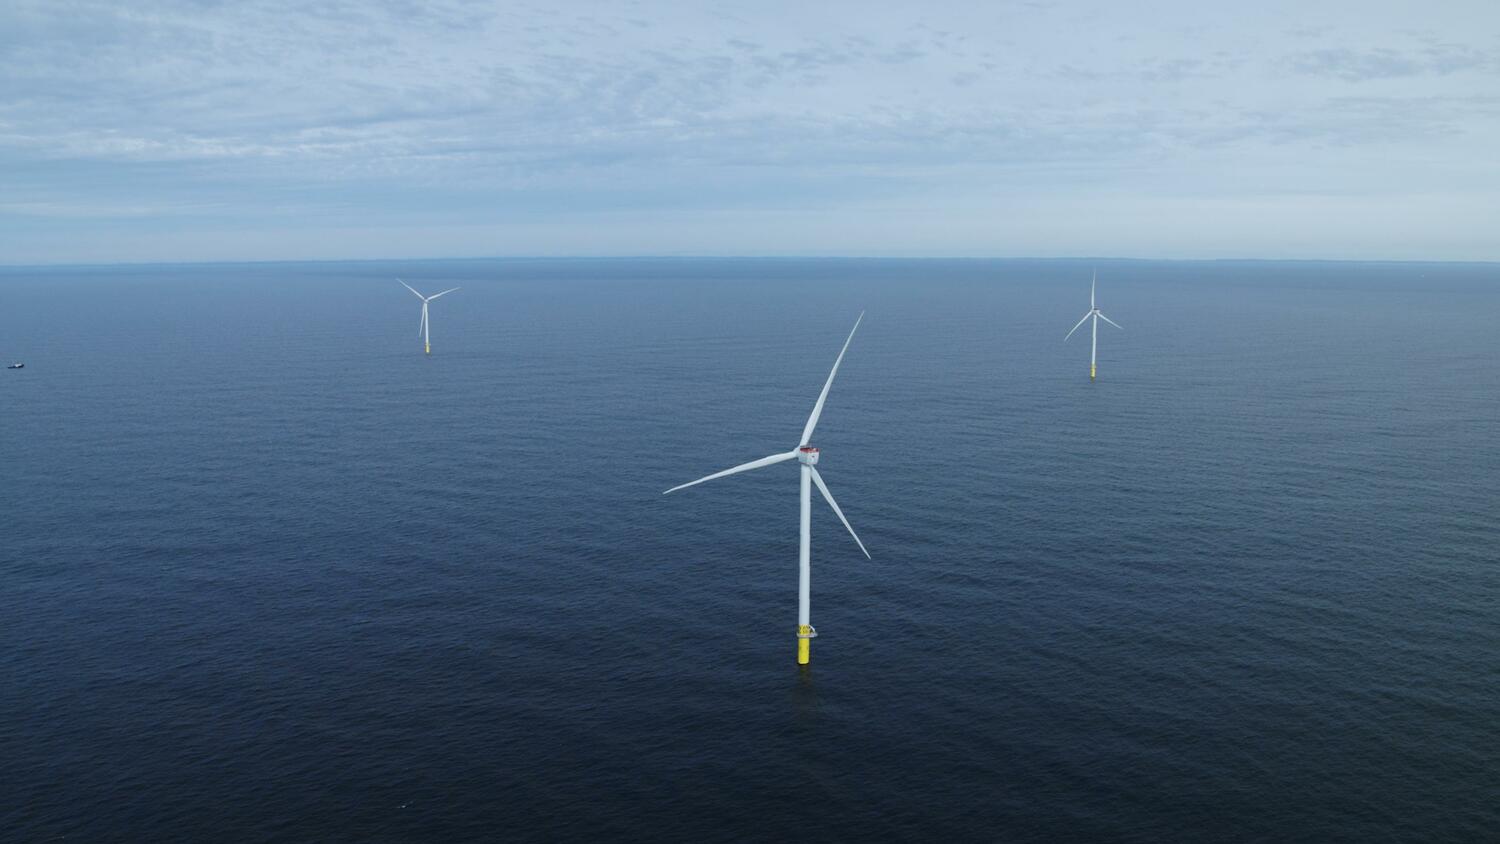 The last of the 12 turbines that make up South Fork Wind has been installed in the ocean southeast of Montauk and will come online soon, marking the completion of the project. ORSTED